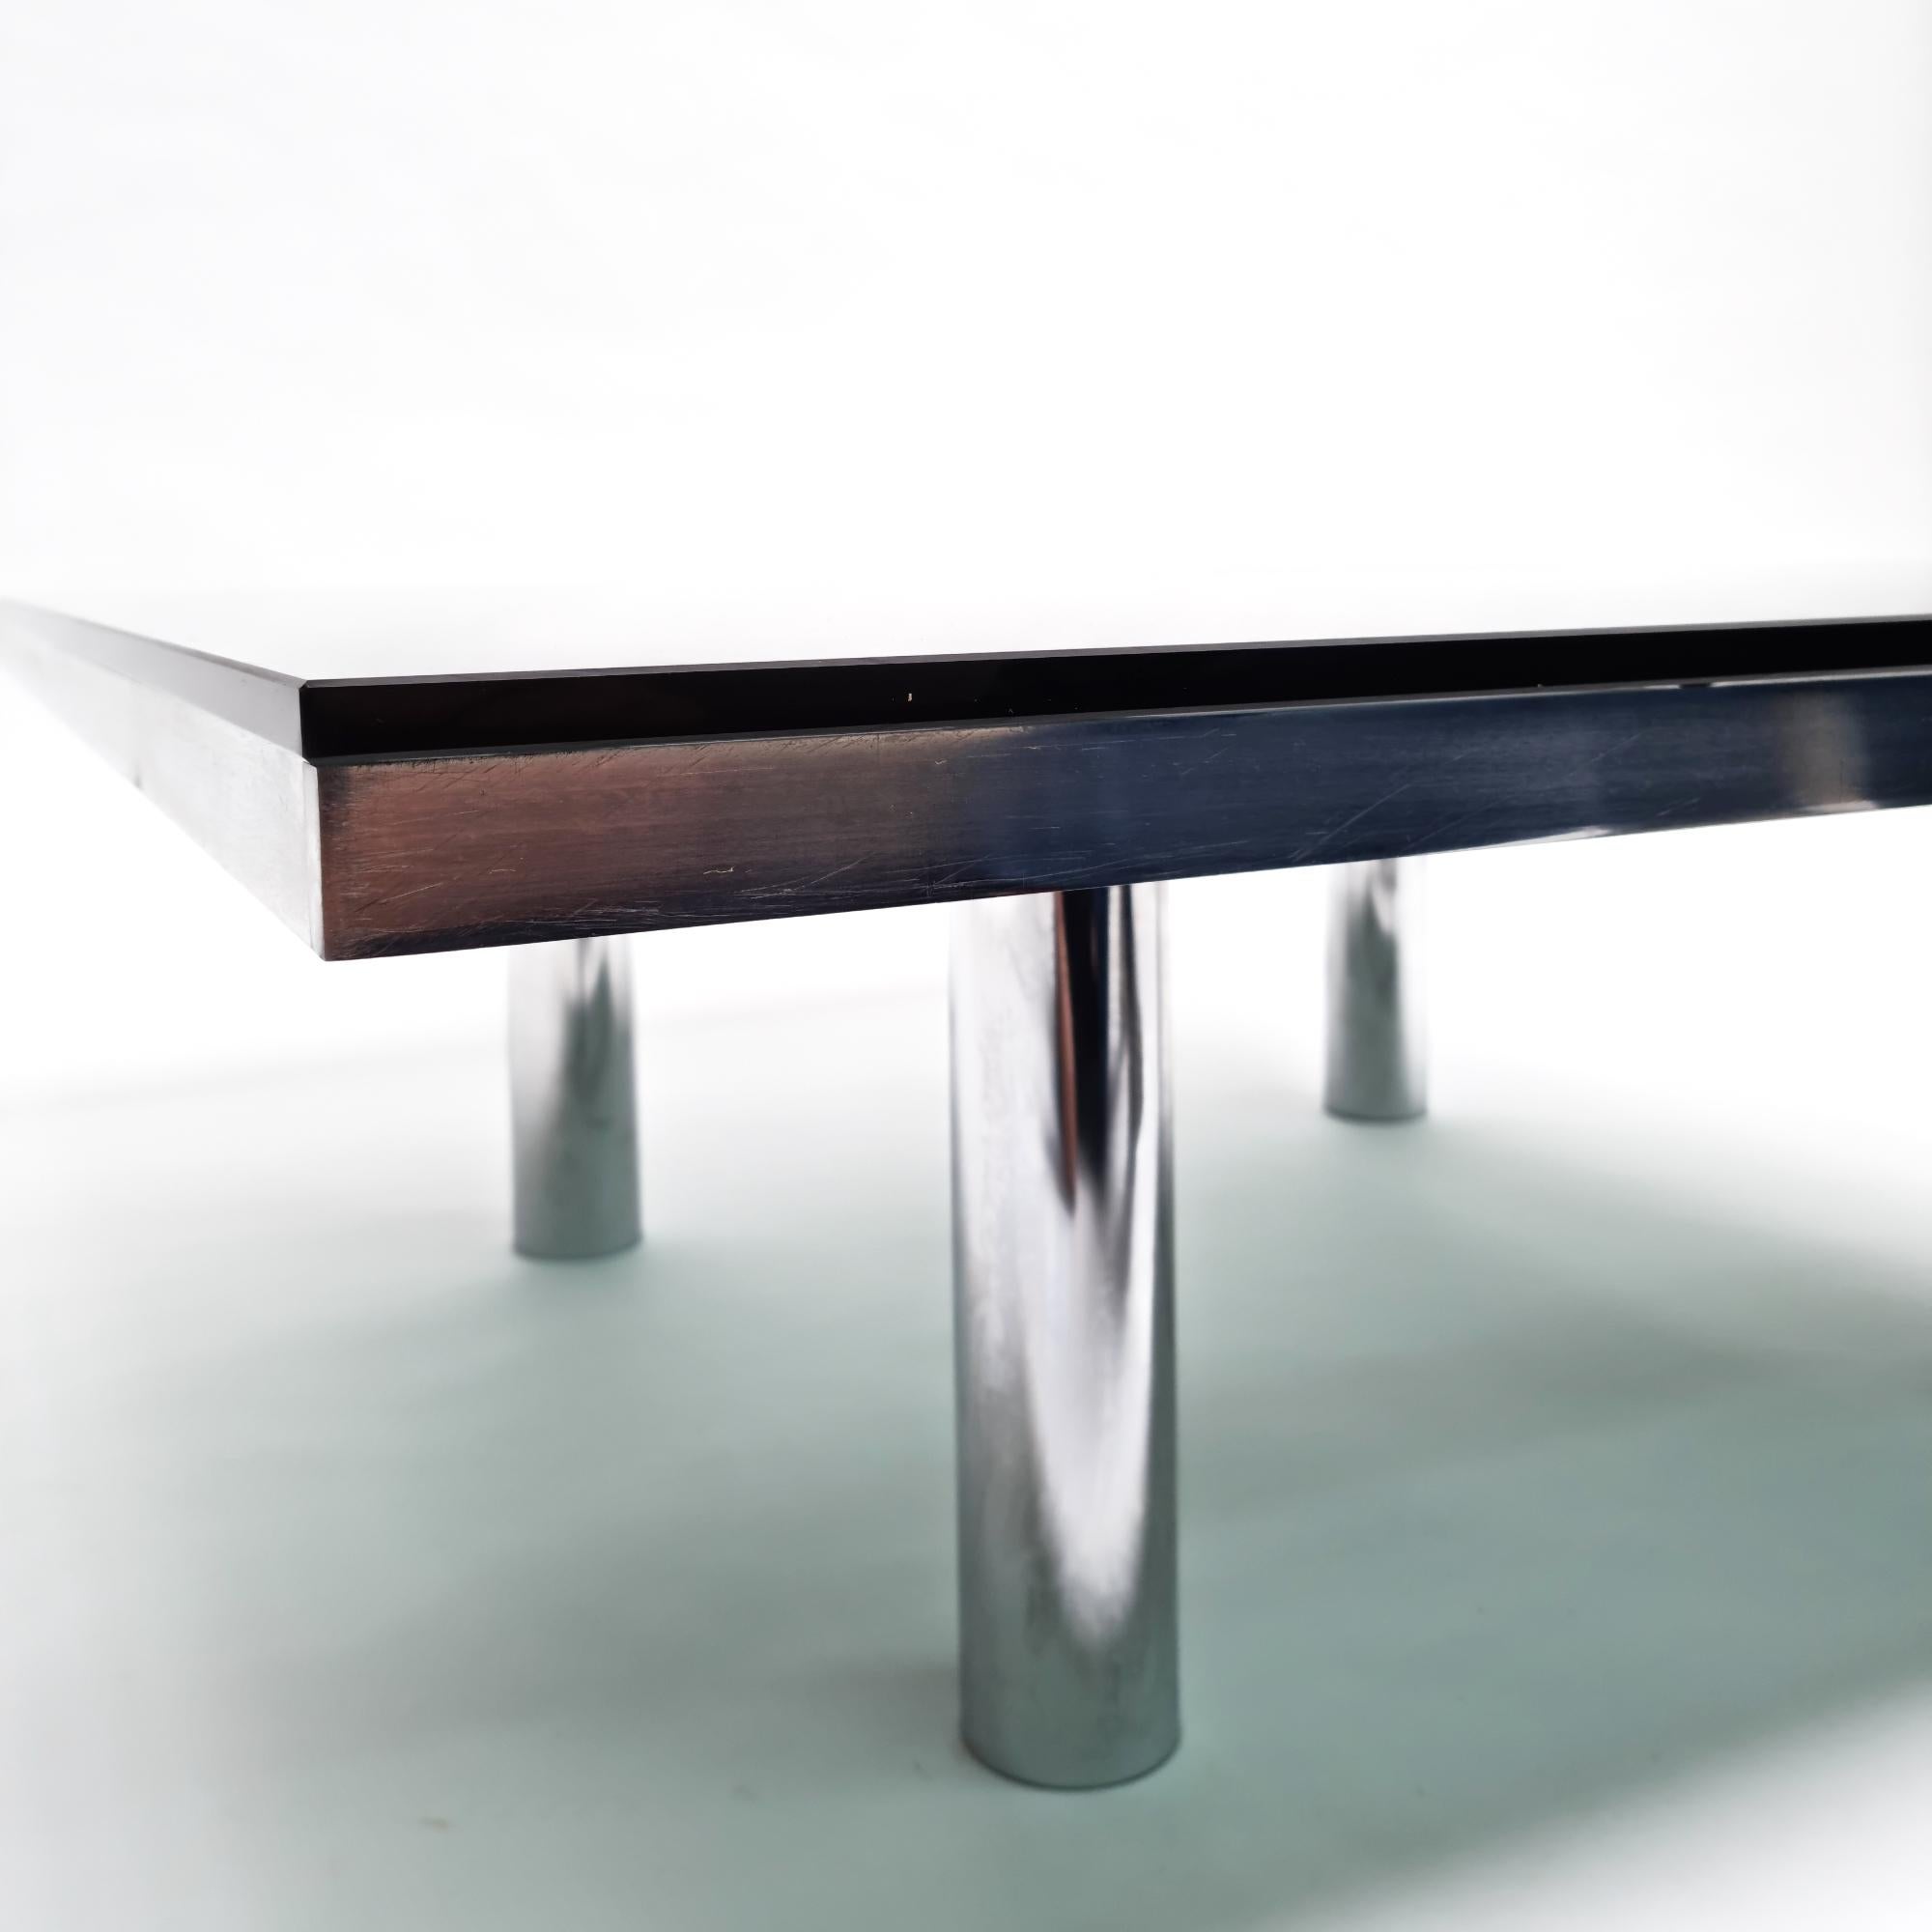 Belgian Large Coffee Table by Tobia Scarpa for Knoll International, 1969